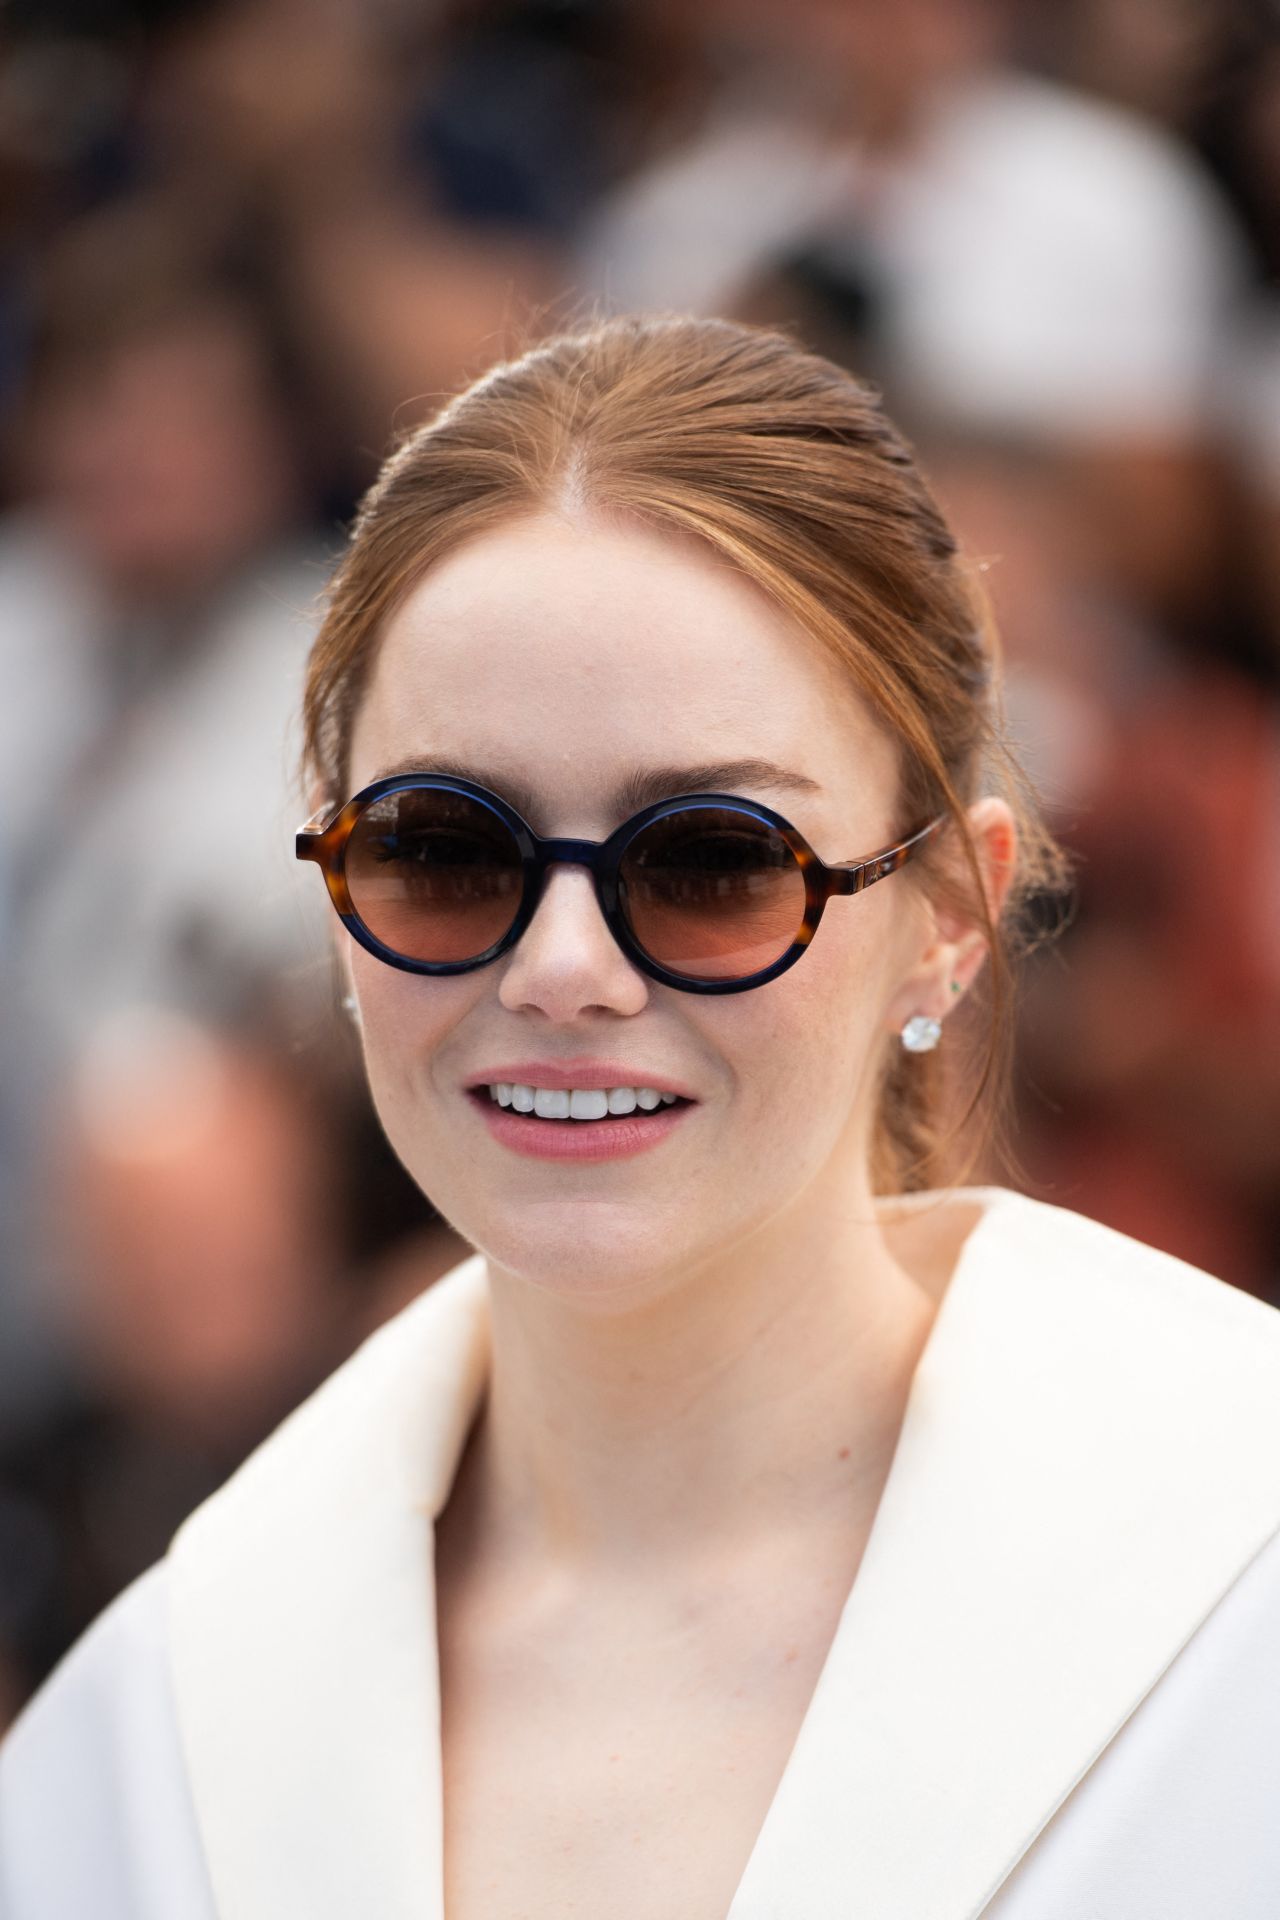 EMMA STONE AT KINDS OF KINDNESS PHOTOCALL IN CANNES FILM FESTIVAL09